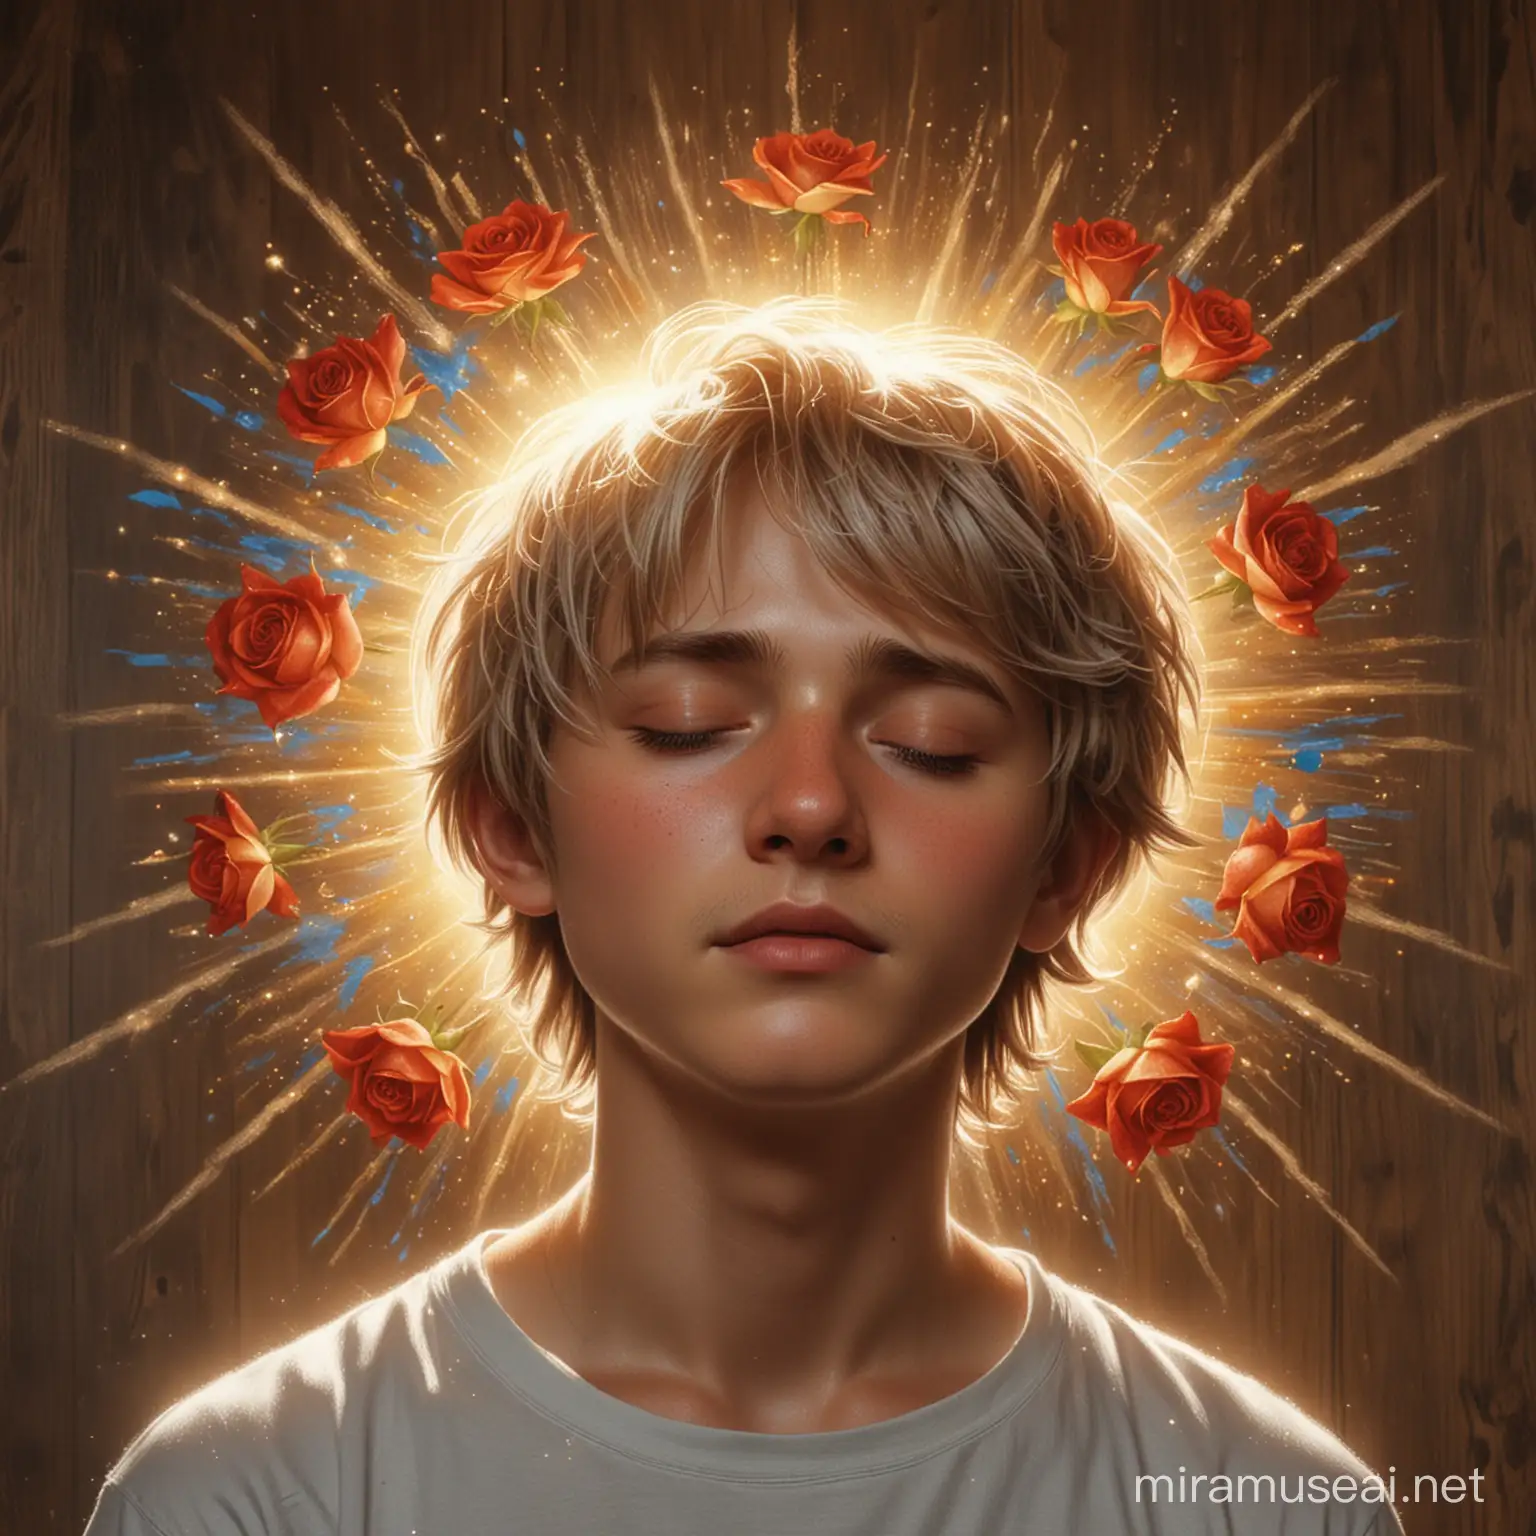 Boy Humanizing the Sun with Radiant Halo Emotional Illustration of Light and Tears